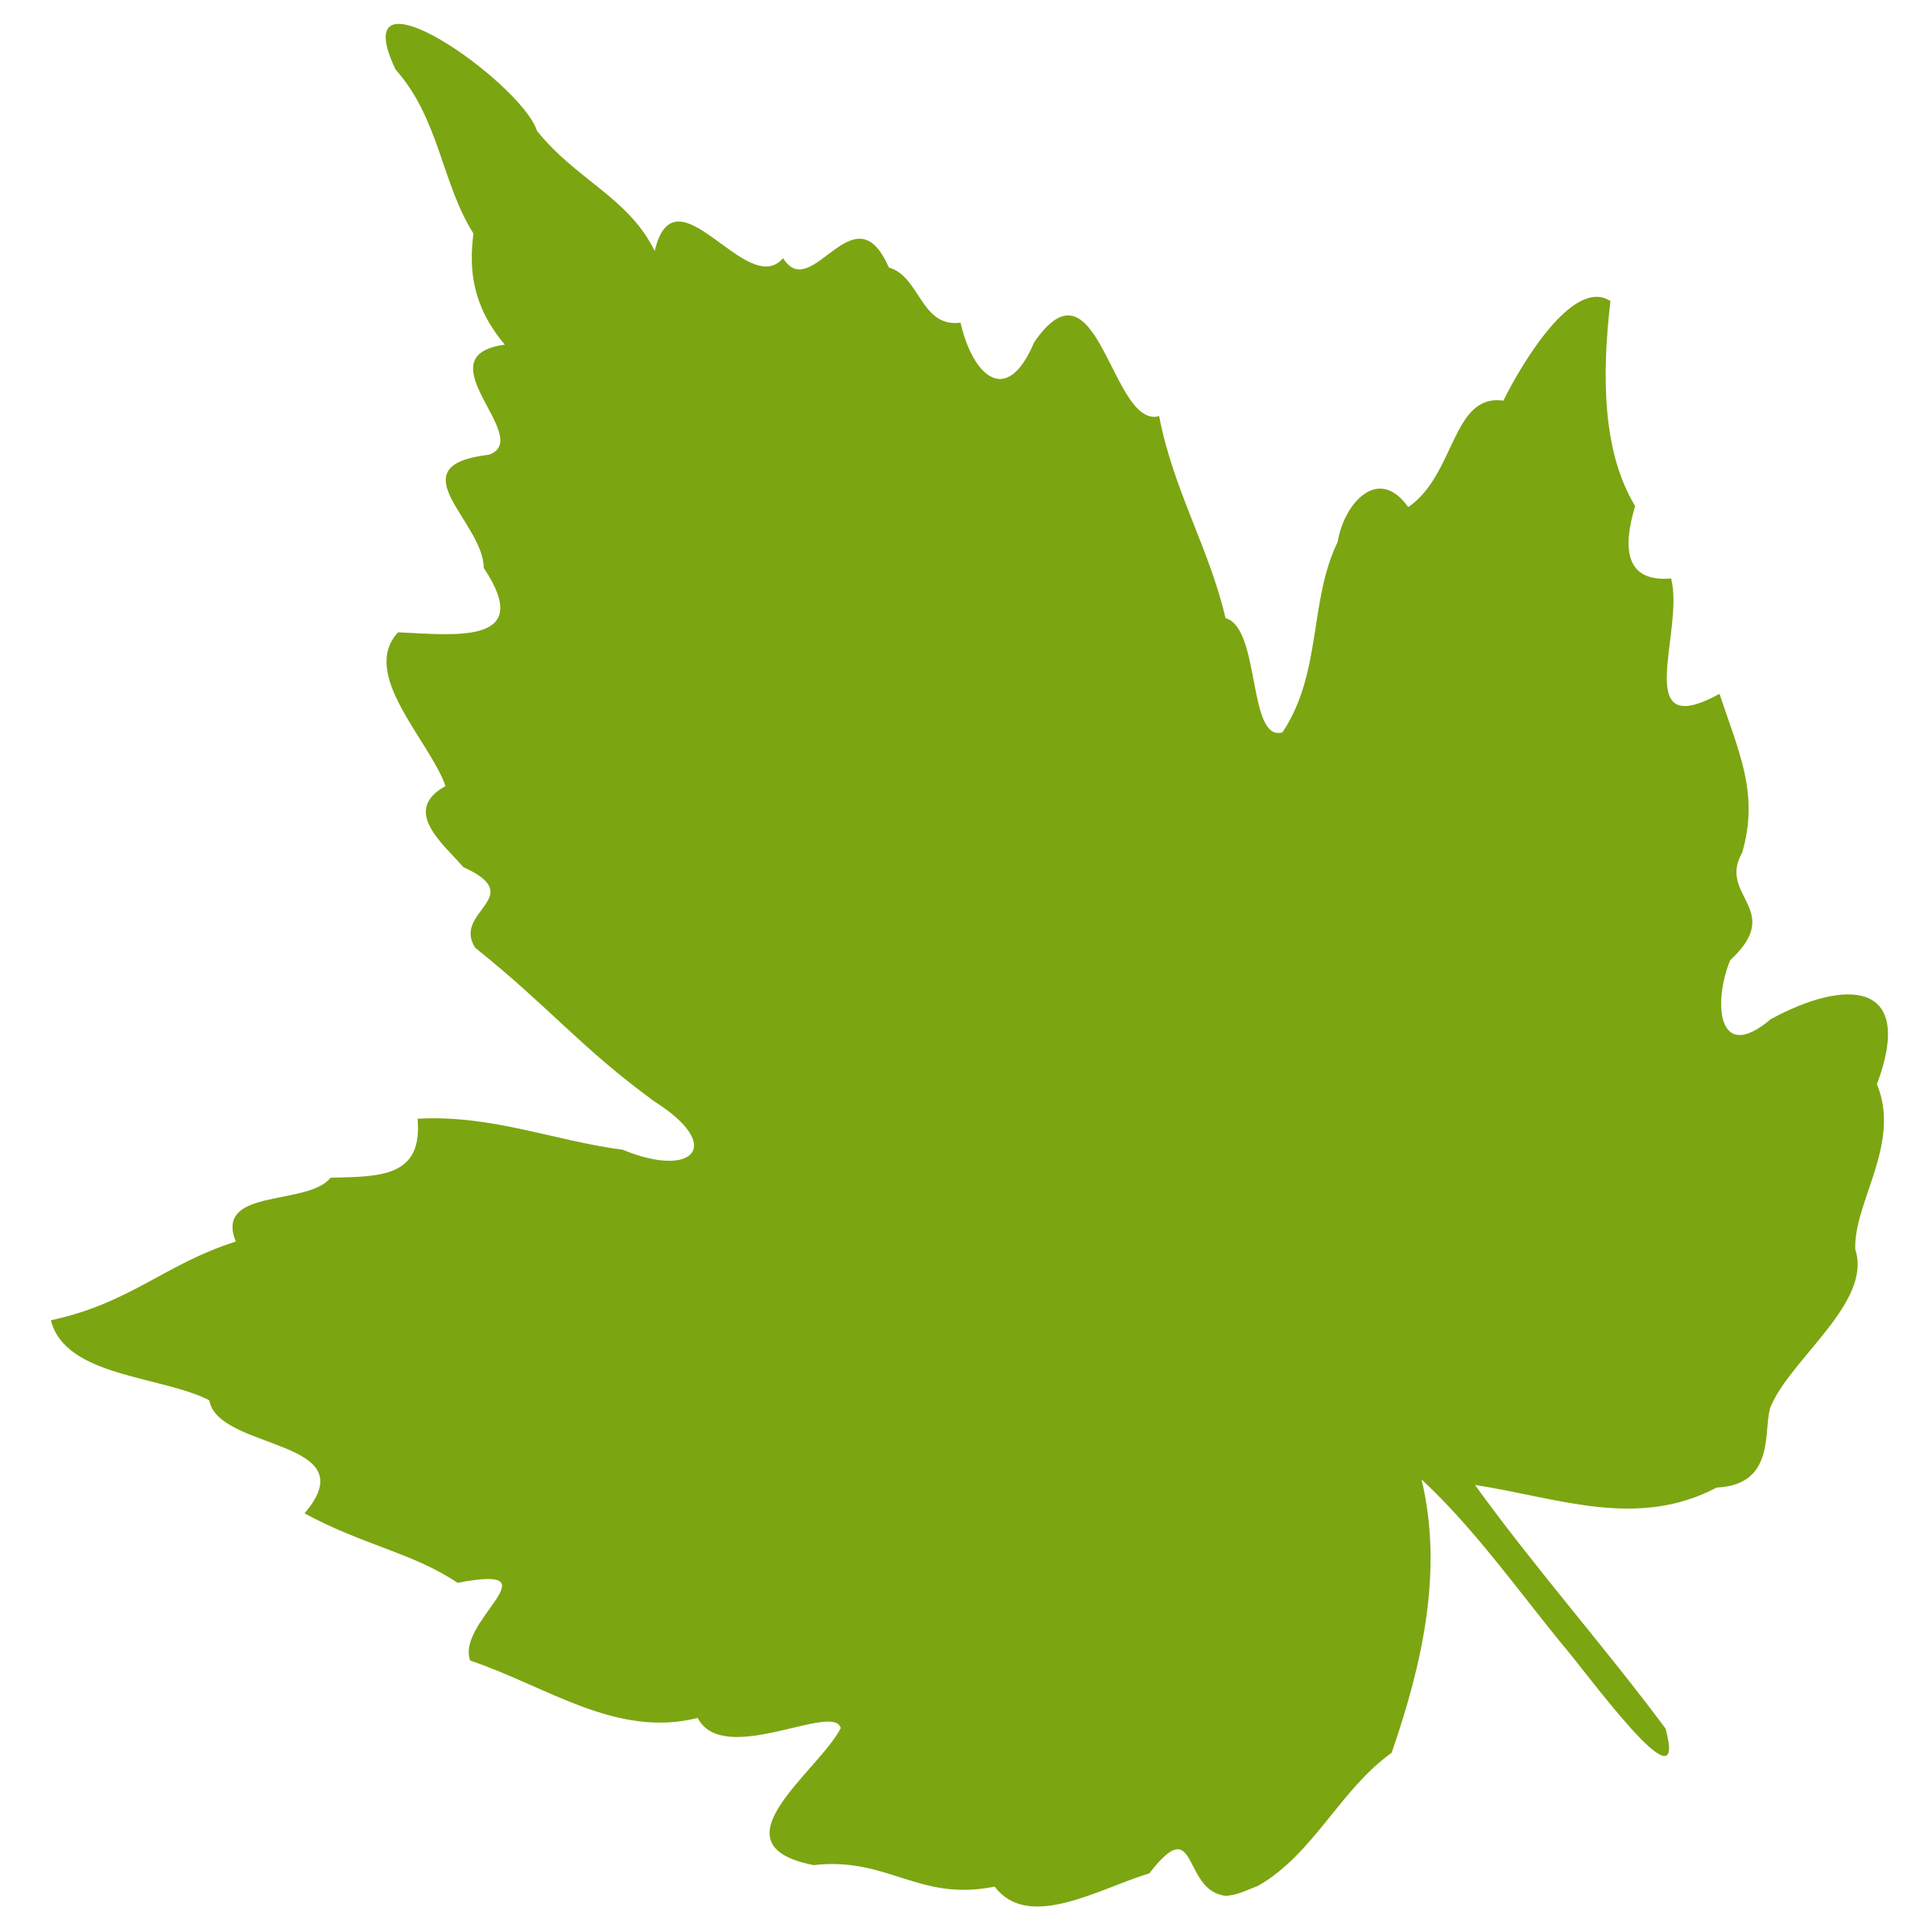 Grape Leaf Drawing at GetDrawings.com | Free for personal use Grape ...